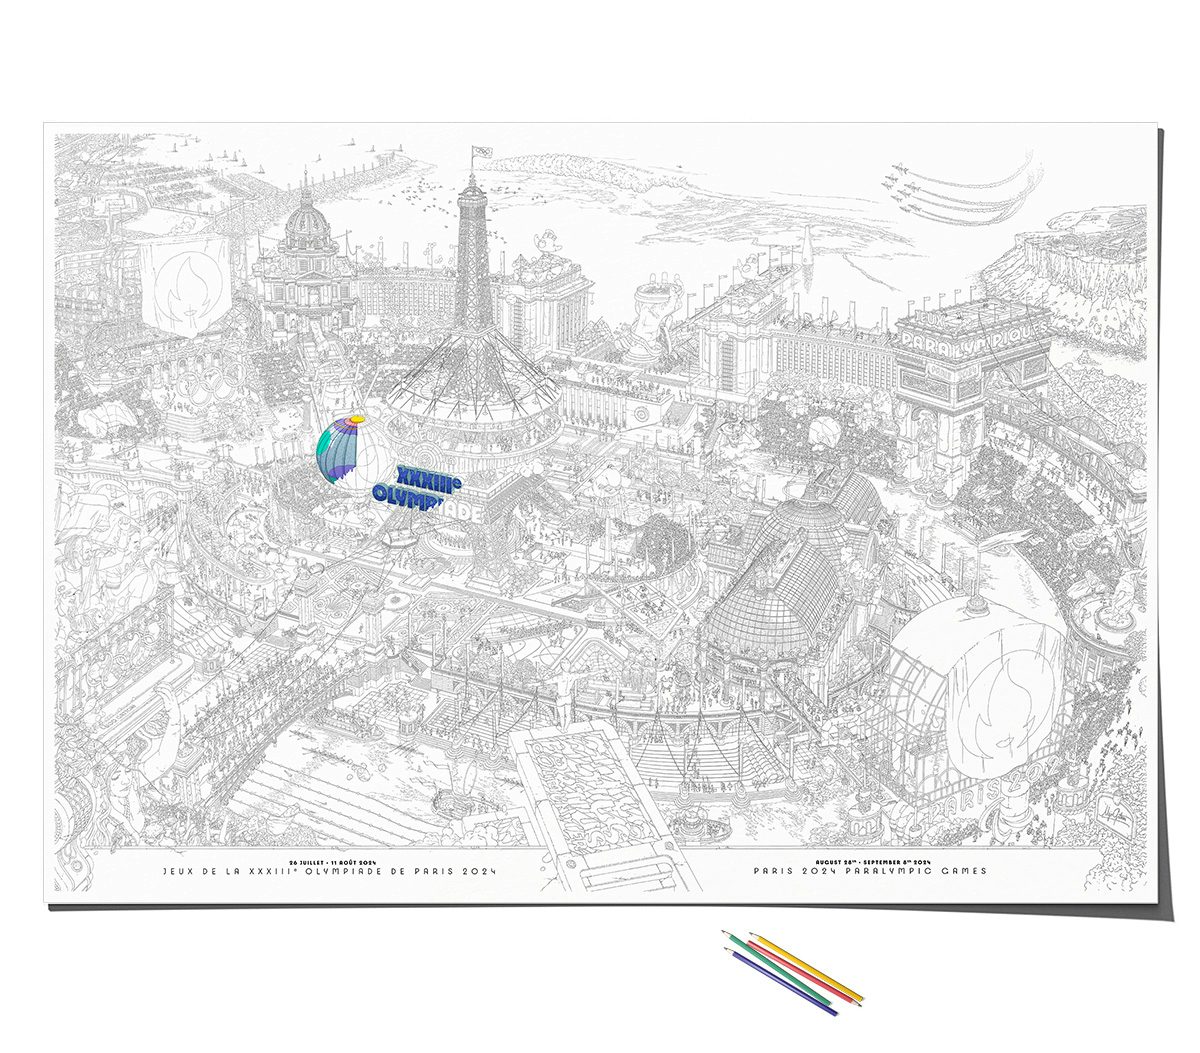 Image shows a horizontal black and white poster illustrated by Ugo Gattoni for the Paris 2024 Olympic and Paralympic Games showing a densely filled fantasy coastal version of Paris that people can colour in at home